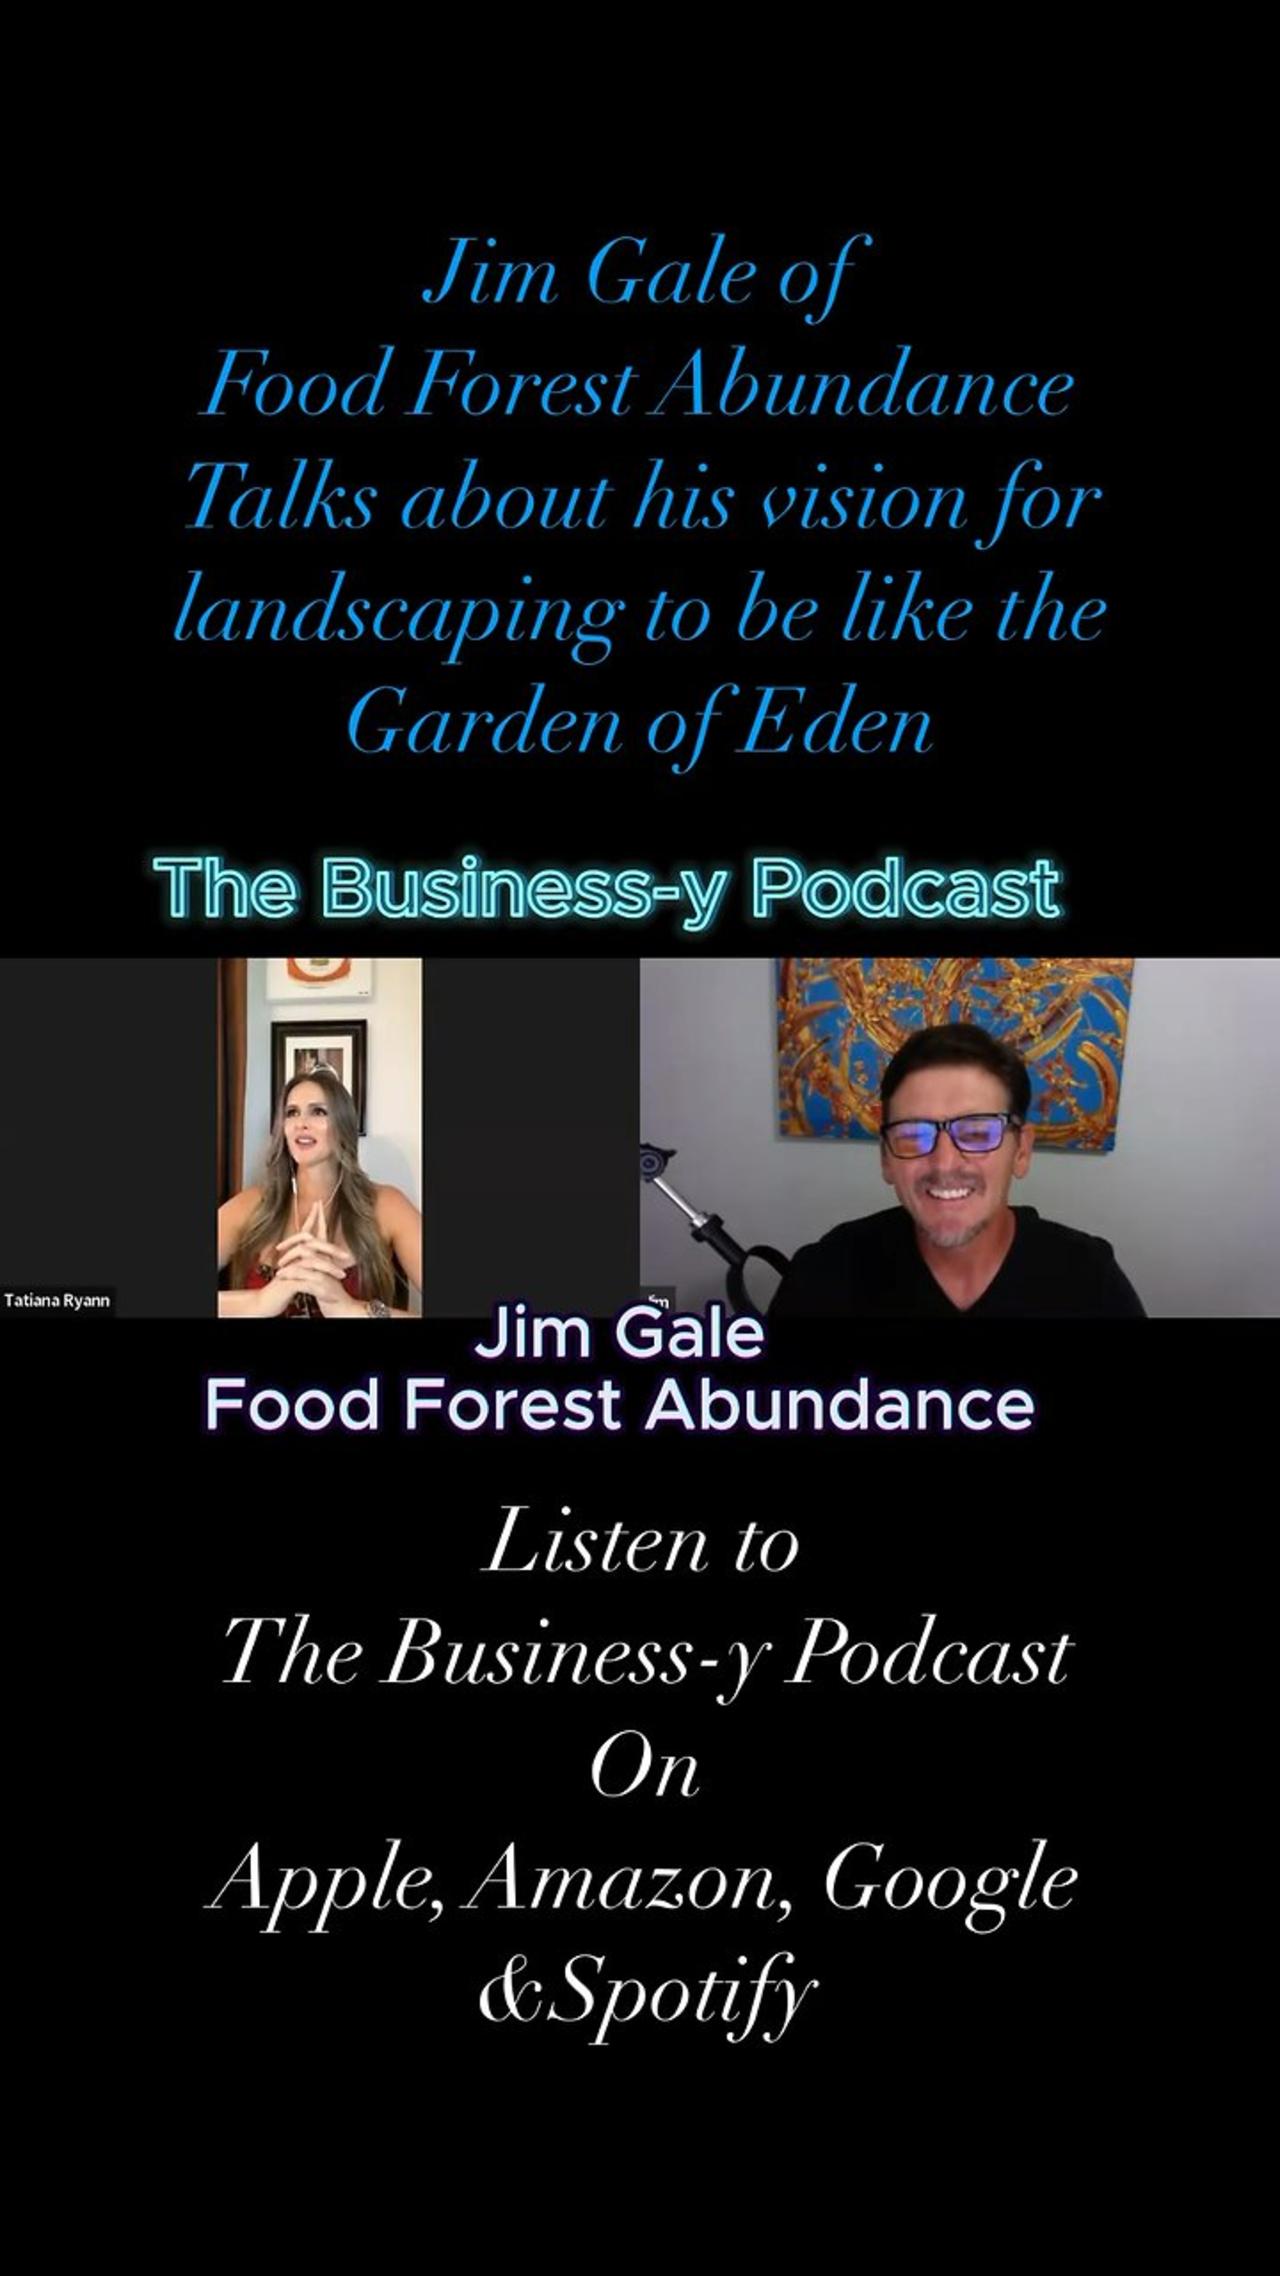 The Business-y Podcast Ep. 17 Jim Gale, founder Food Forest Abundance